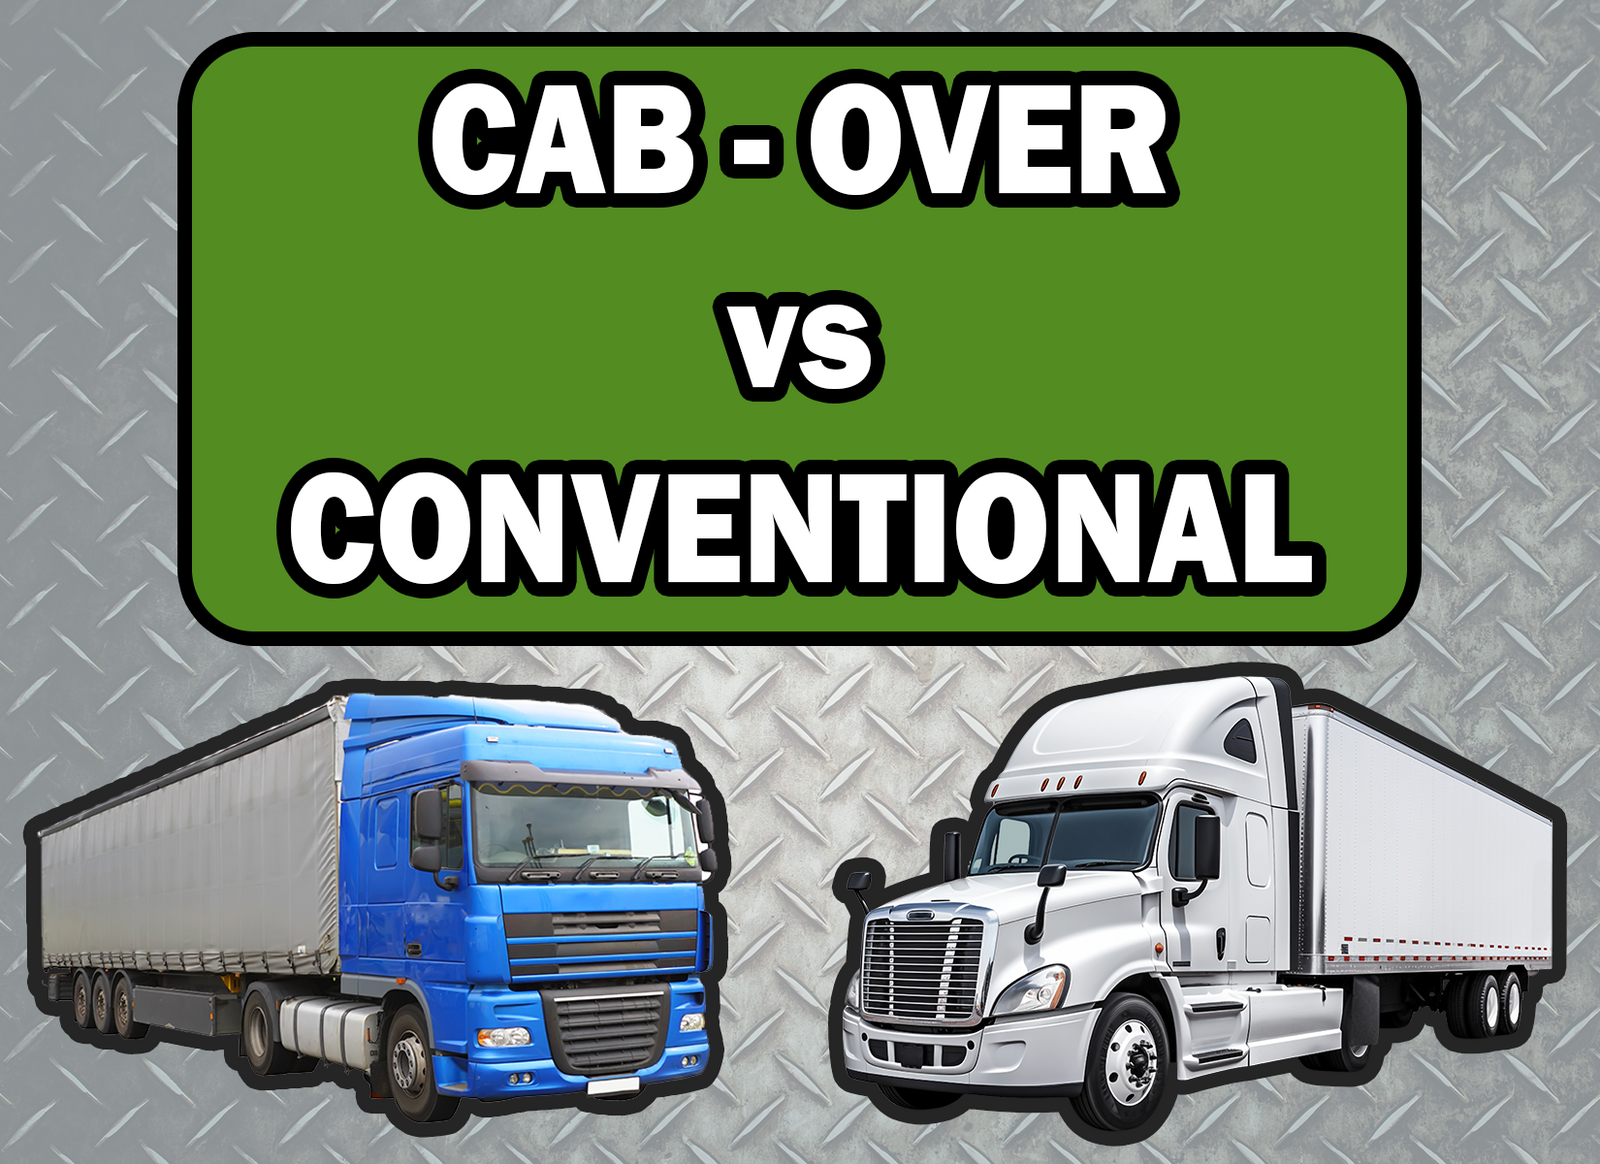 Cab-Over VS Conventional Trucks: What's the Difference?